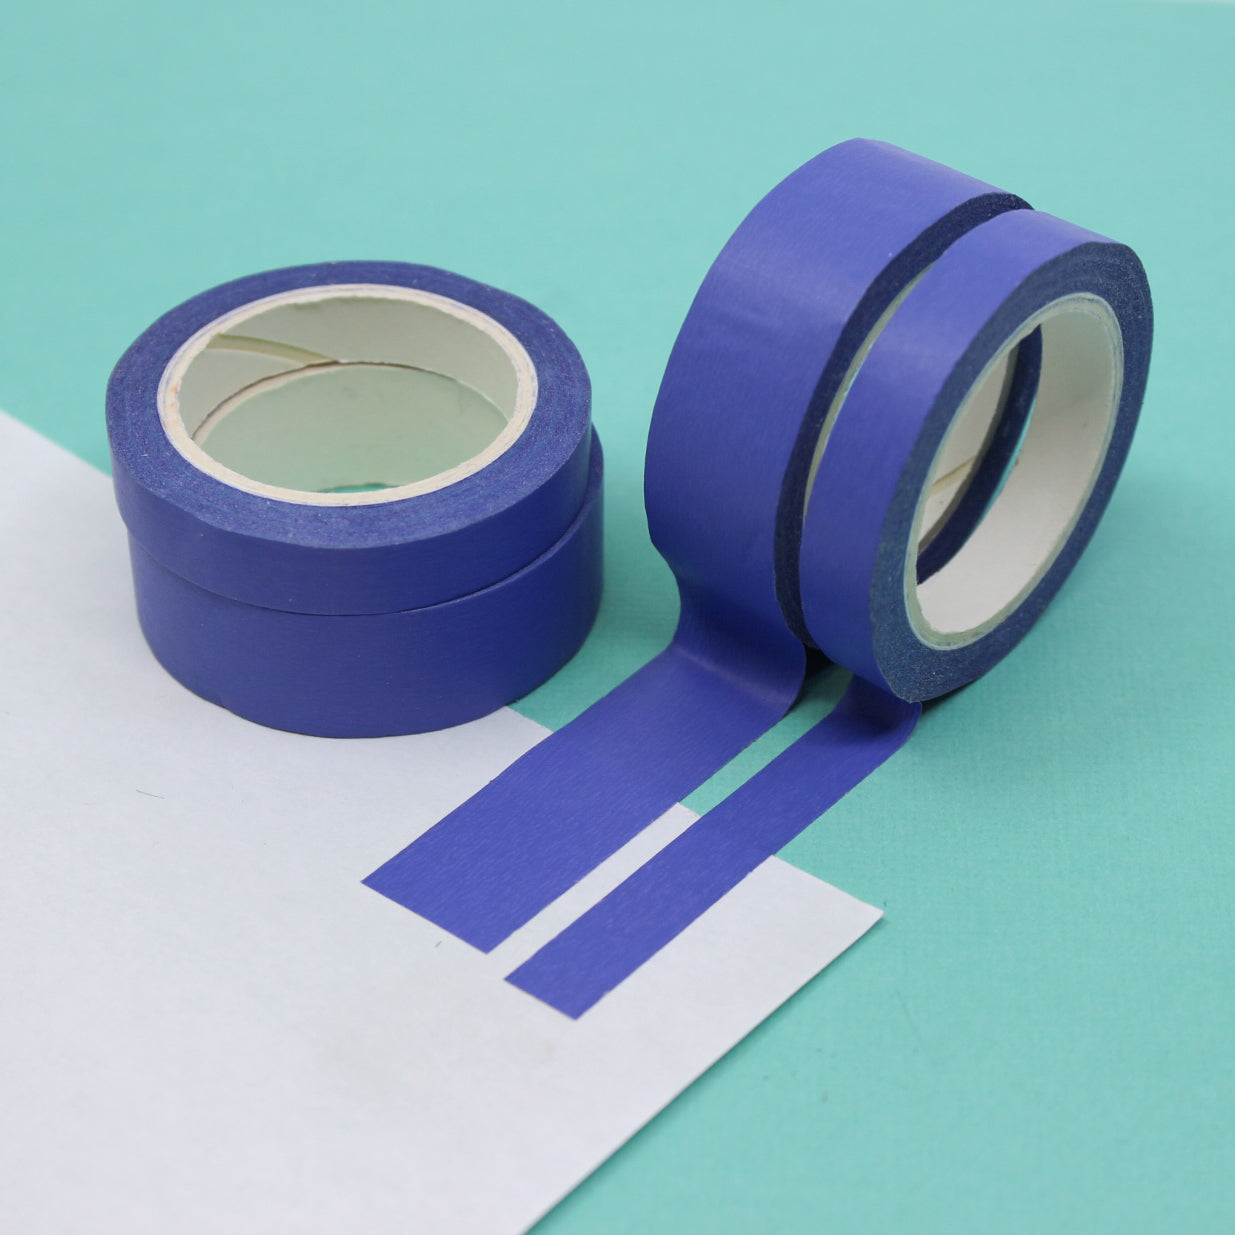 This primary purple solid washi tape is vibrant and fun. This washi tape is part of our solid neon thick-thin matching duo washi collection. Find the perfect color for any project in BBB Supplies' thick-thin solids collection, from neon to neutral to pastel and more. This tape is sold at BBB Supplies Craft Shop.